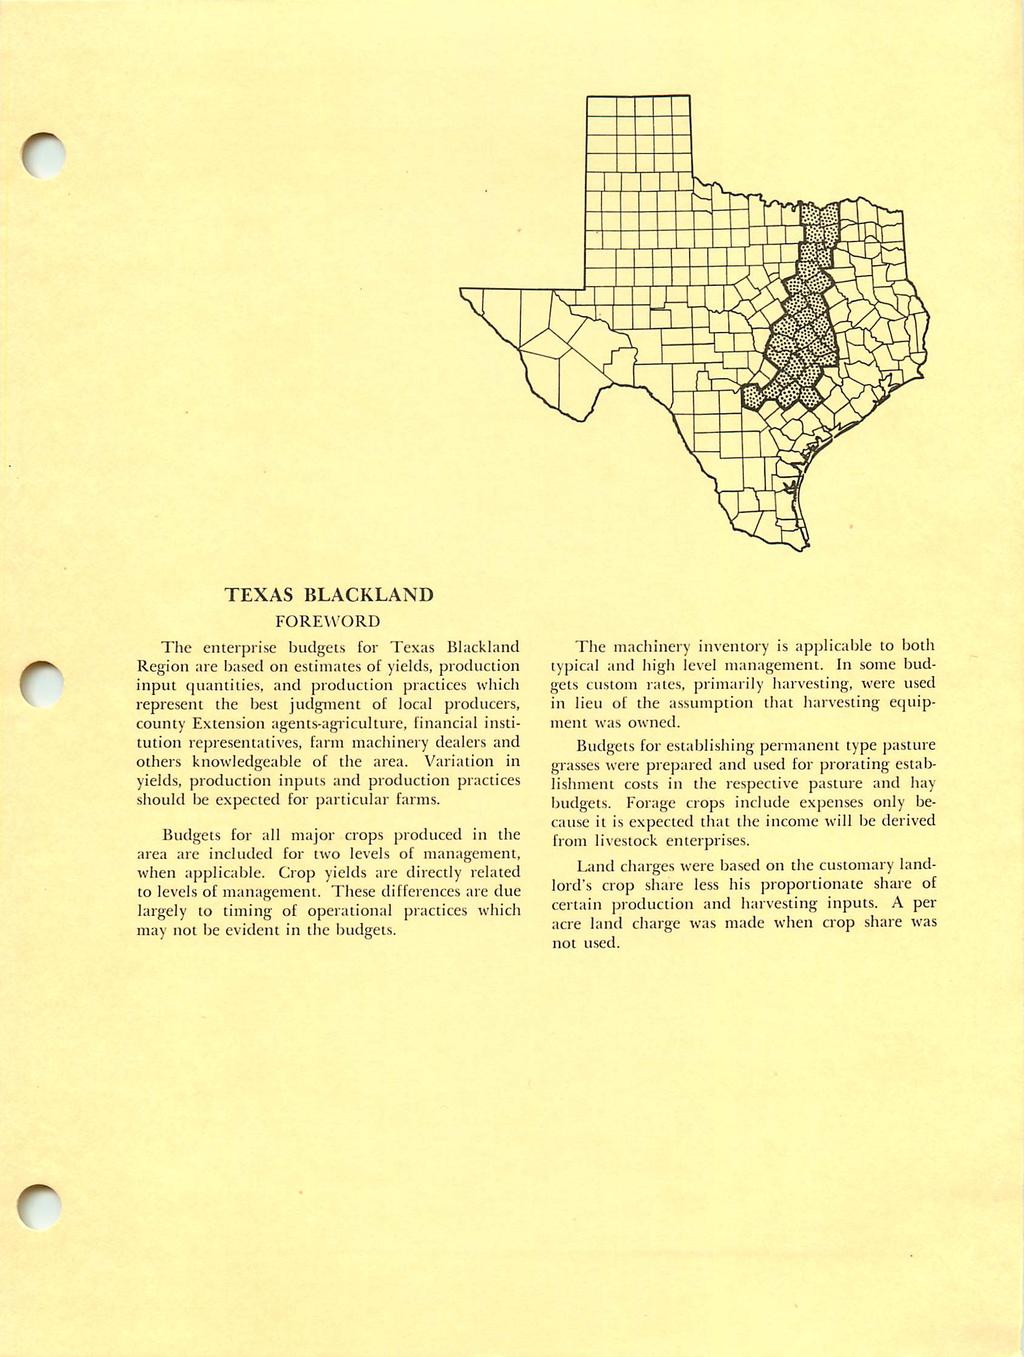 r r TEXAS I5LACKLAND FOREWORD The enterprise budgets for Texas Blackland Region are based on estimates of yields, production input quantities, and production practices which represent the best